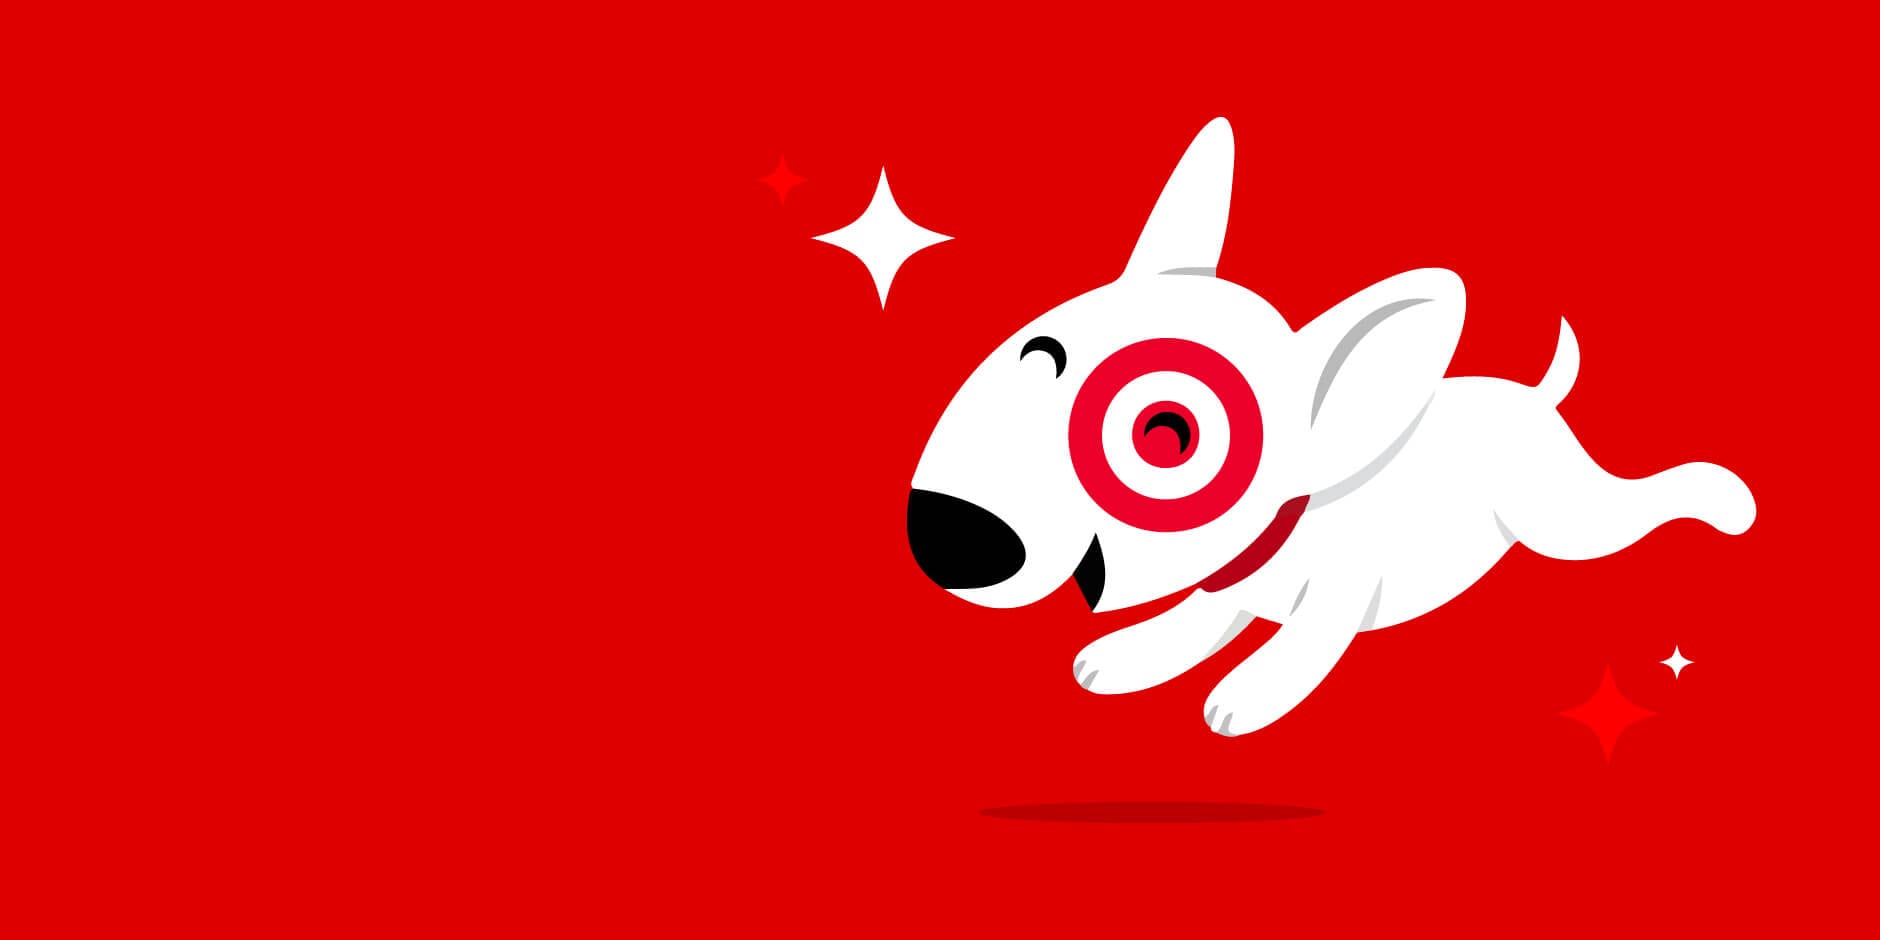 12 Target Return Policy Tips to Maximize Your Shopping